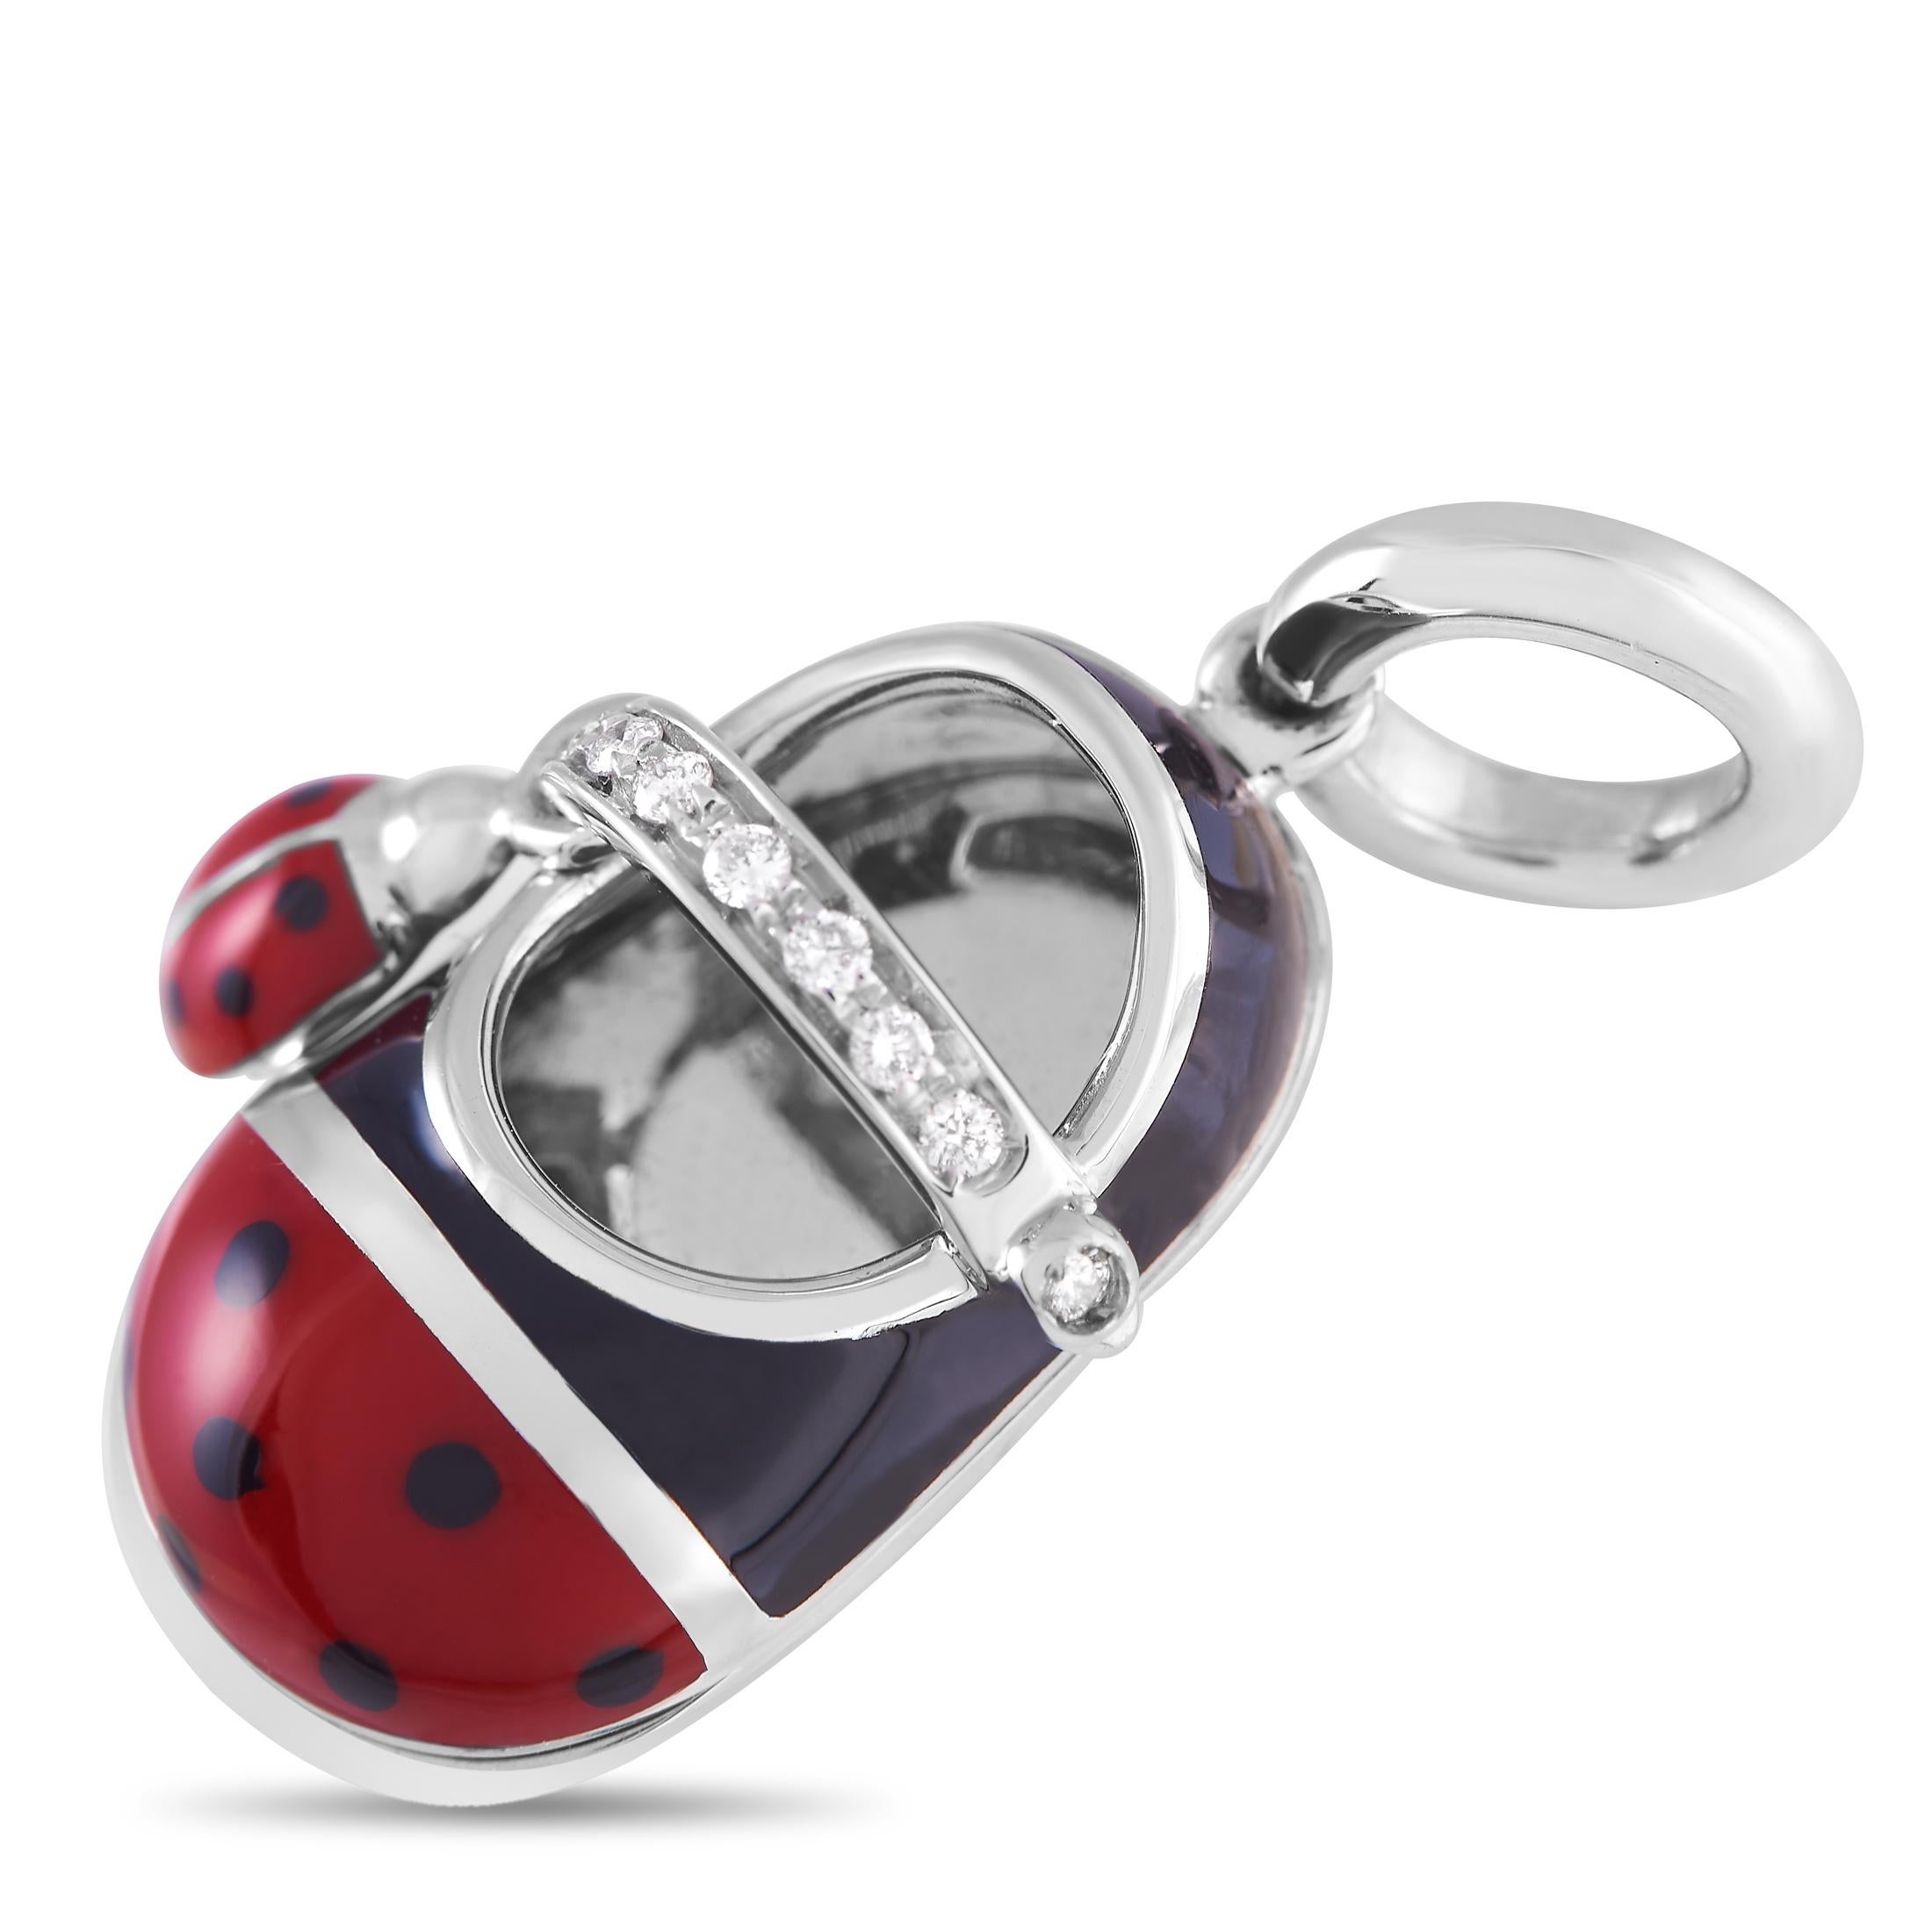 This 18K White Gold pendant from Aaron Basha is truly sweet and stylish. Shaped like a baby shoe, this ladybug-themed piece measures 1” long and comes complete with black and red enamel accents. A dainty row of diamonds totaling 0.06 carats provides